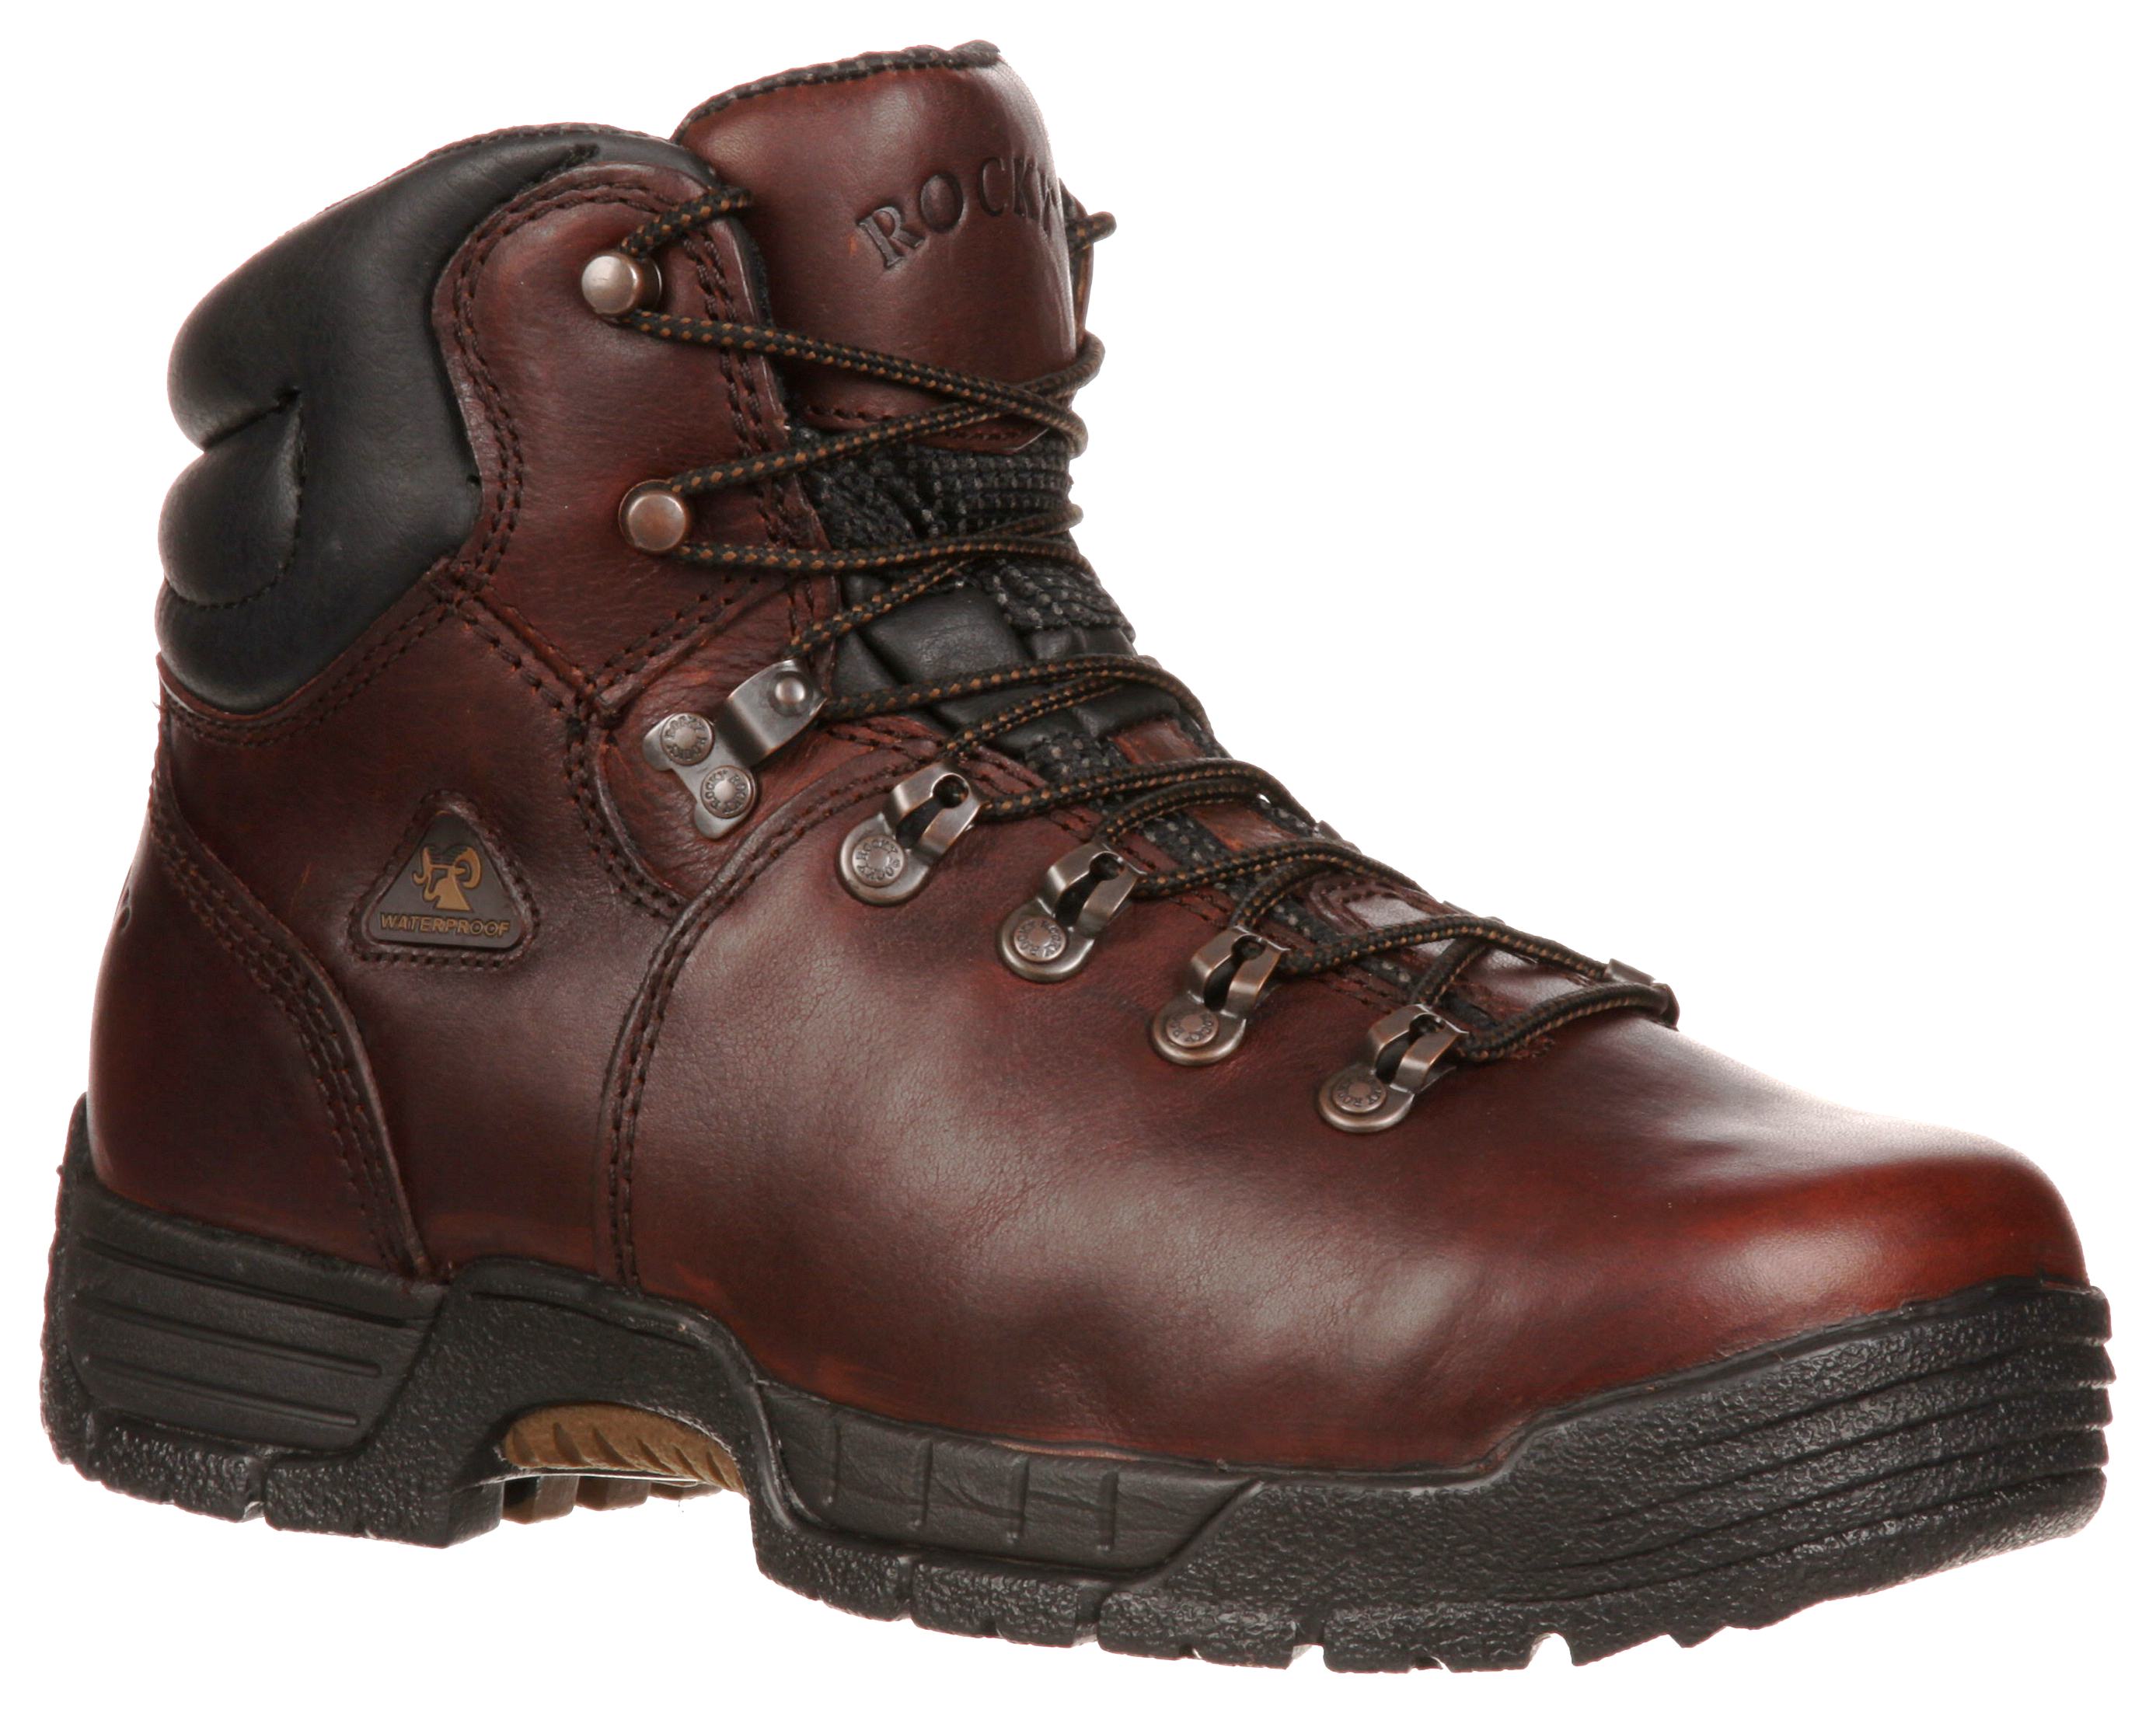 ROCKY MobiLite Waterproof Work Boots for Men - Brown - 8 W